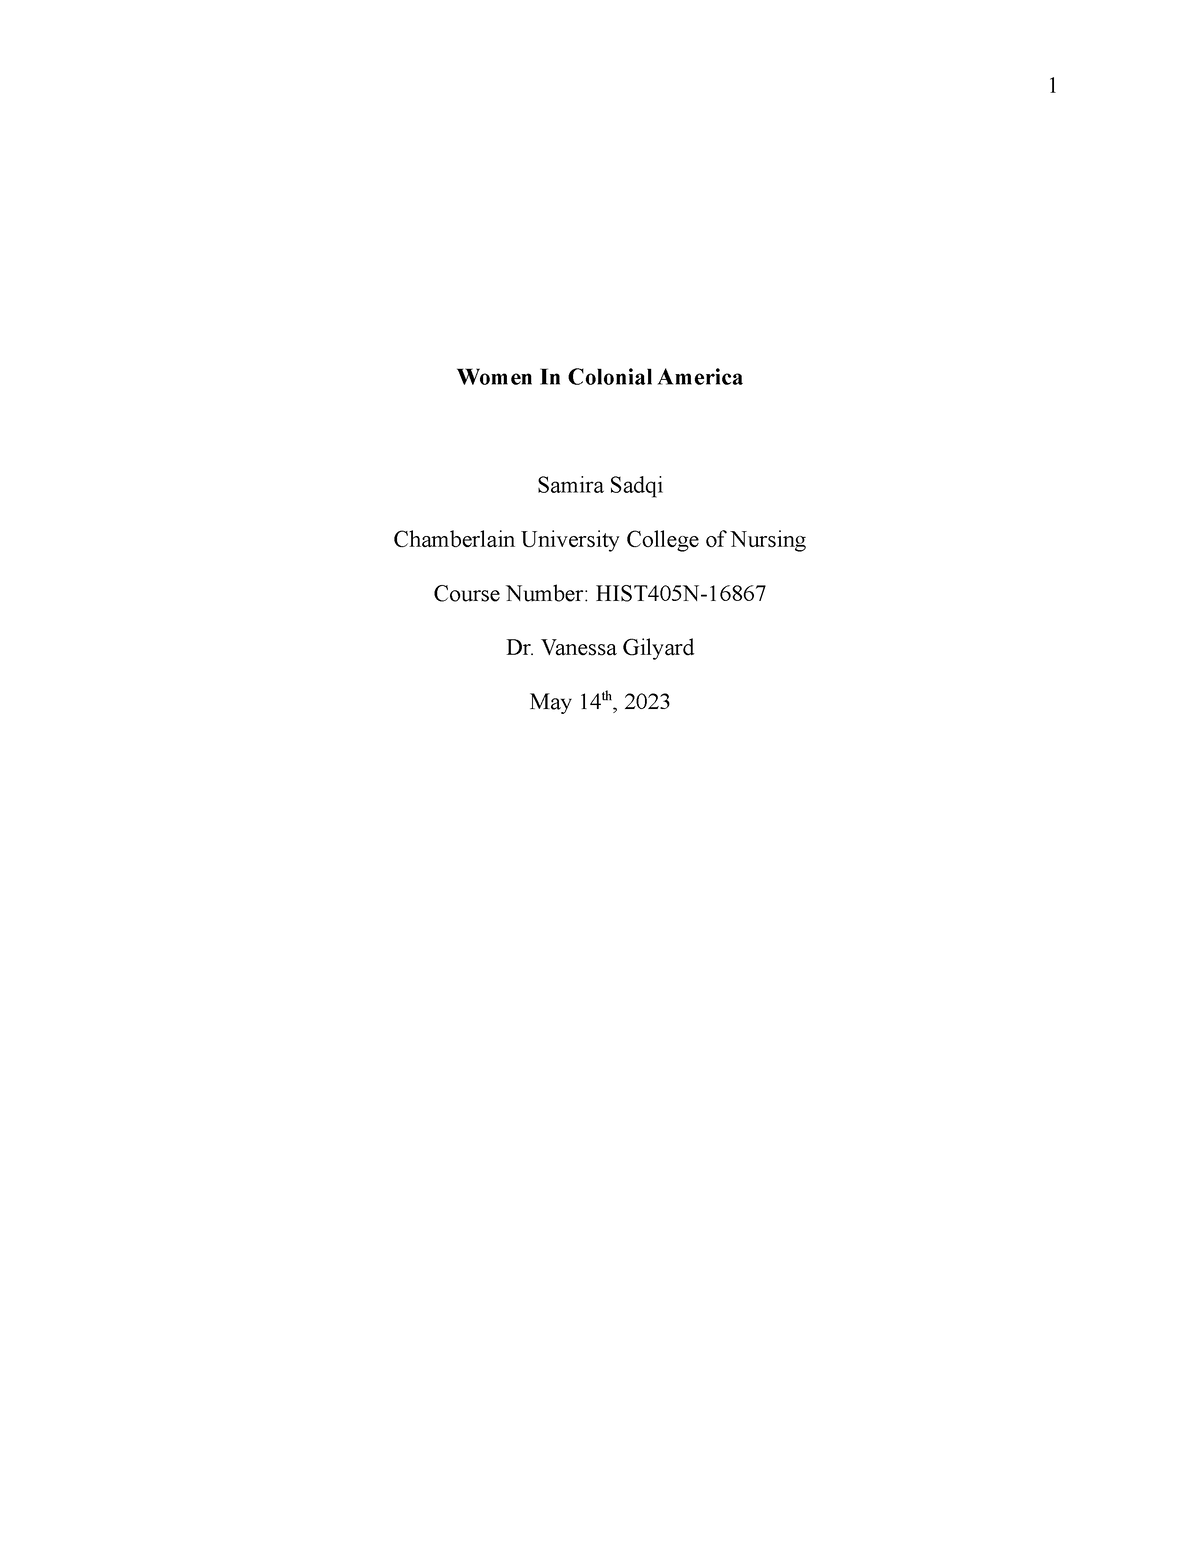 Scholarly Paper Phase 1 - Women In Colonial America Samira Sadqi ...